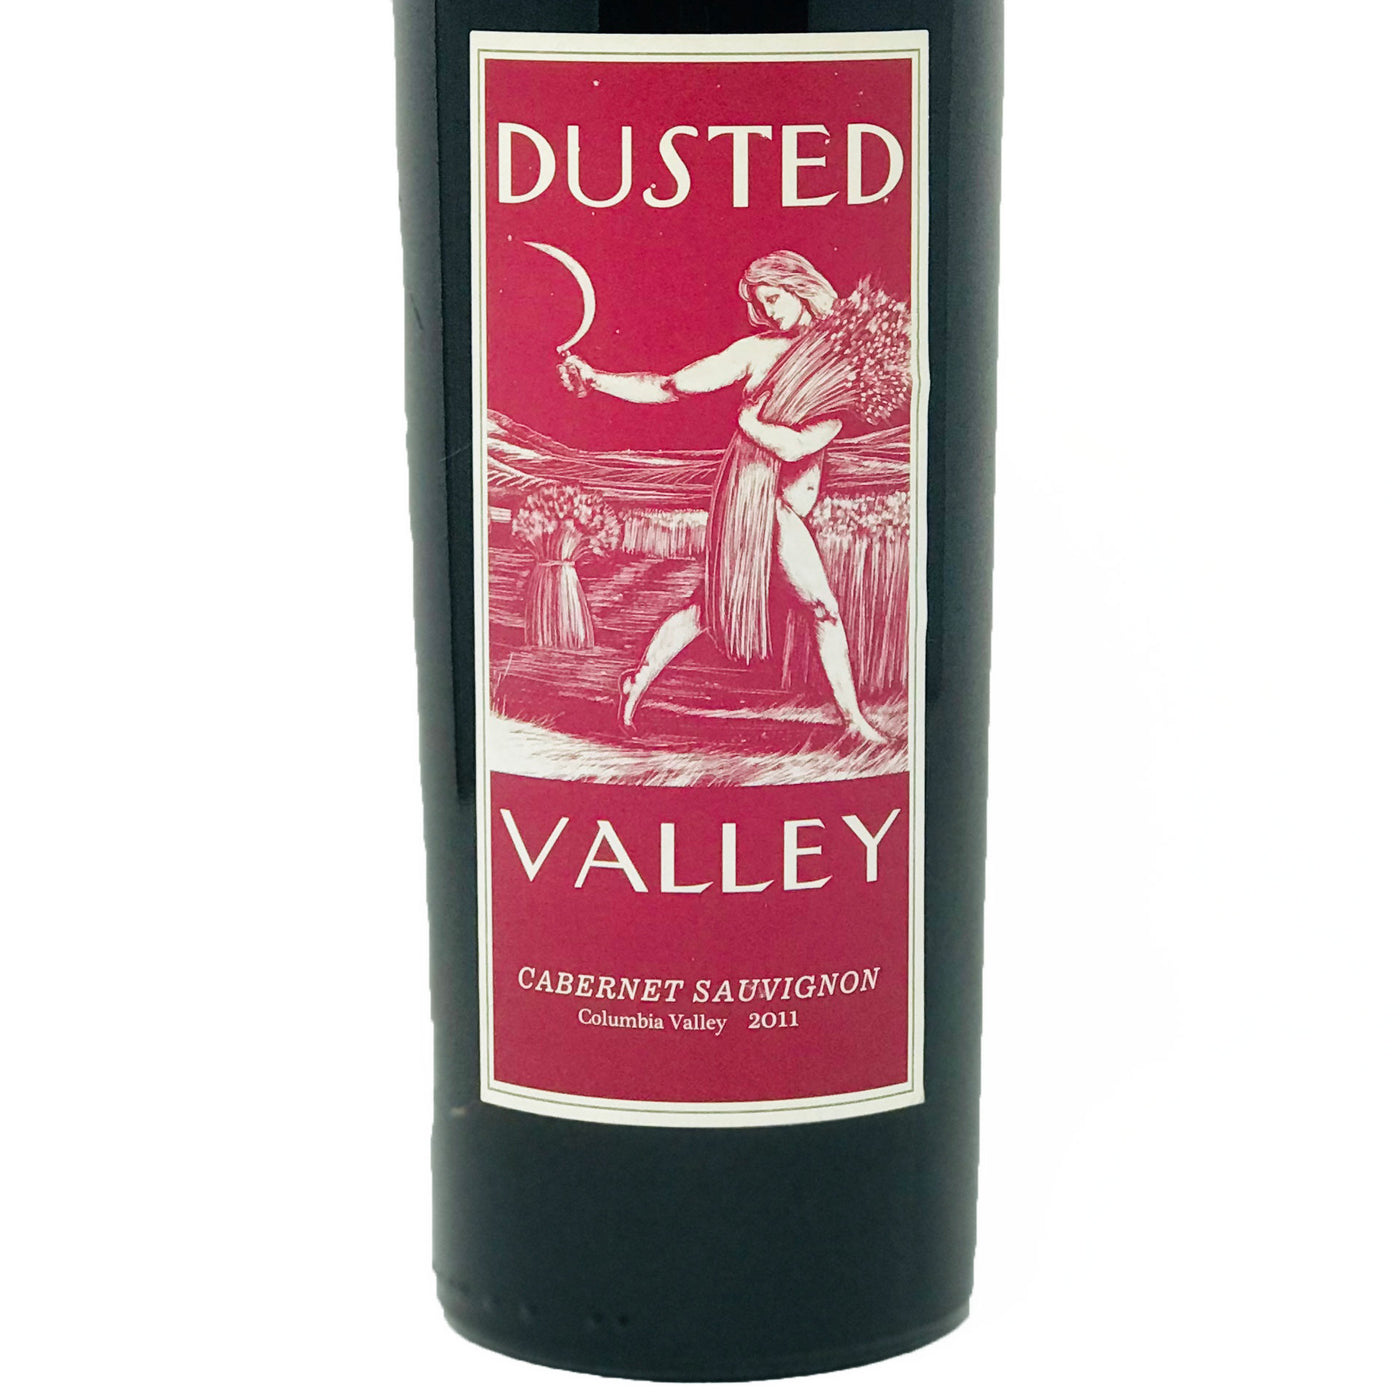 Dusted Valley Cabernet Sauvignon 2011